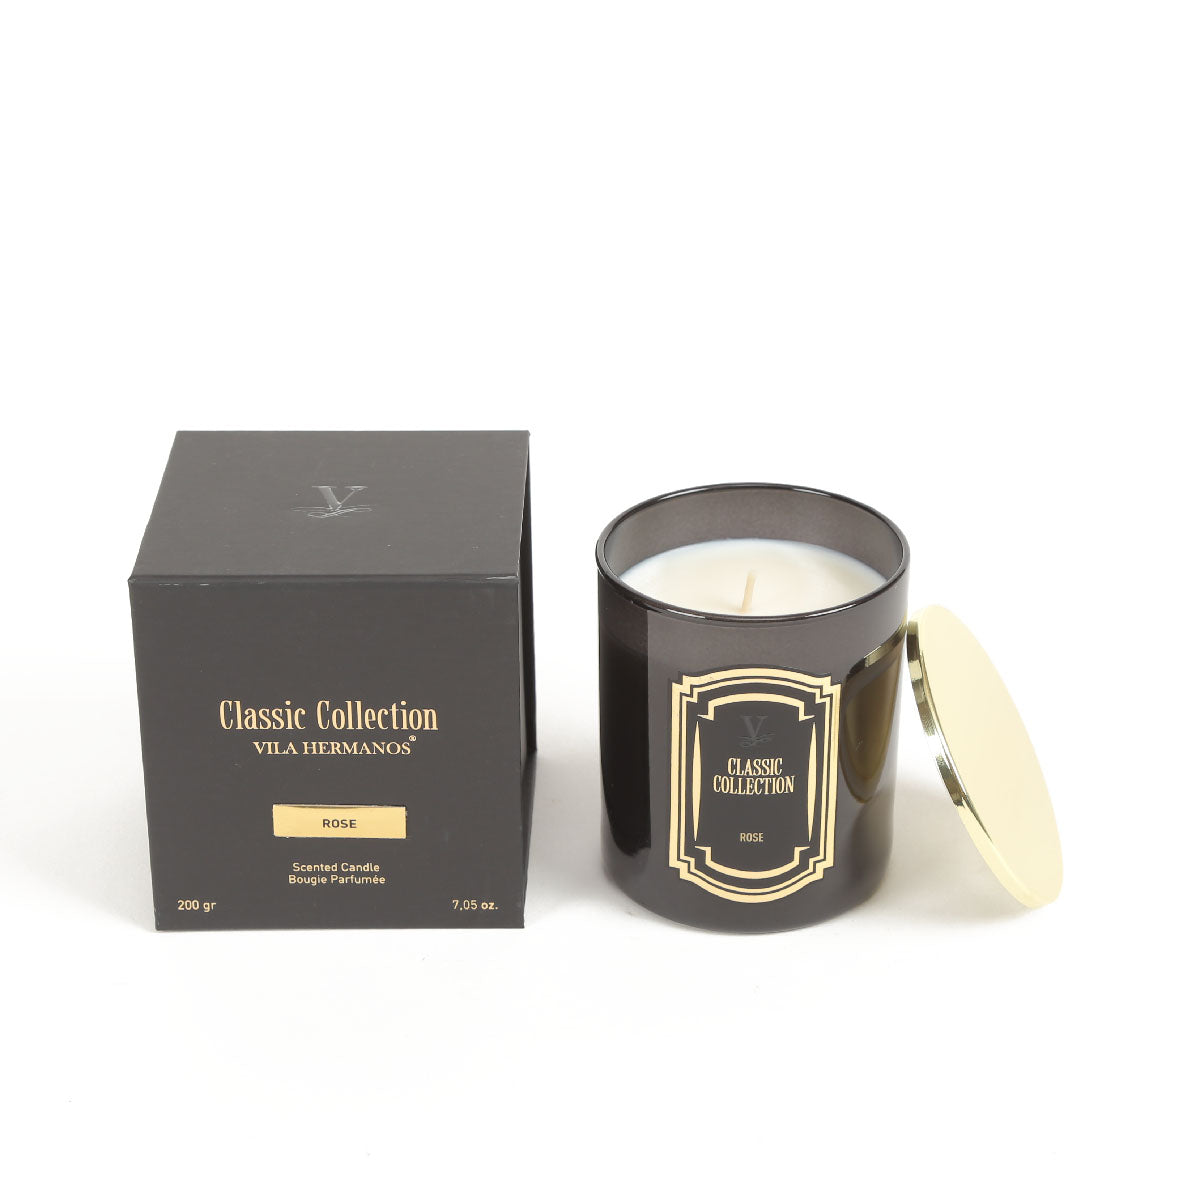 Vila Hermanos Classic Collection Rose Jar Candle